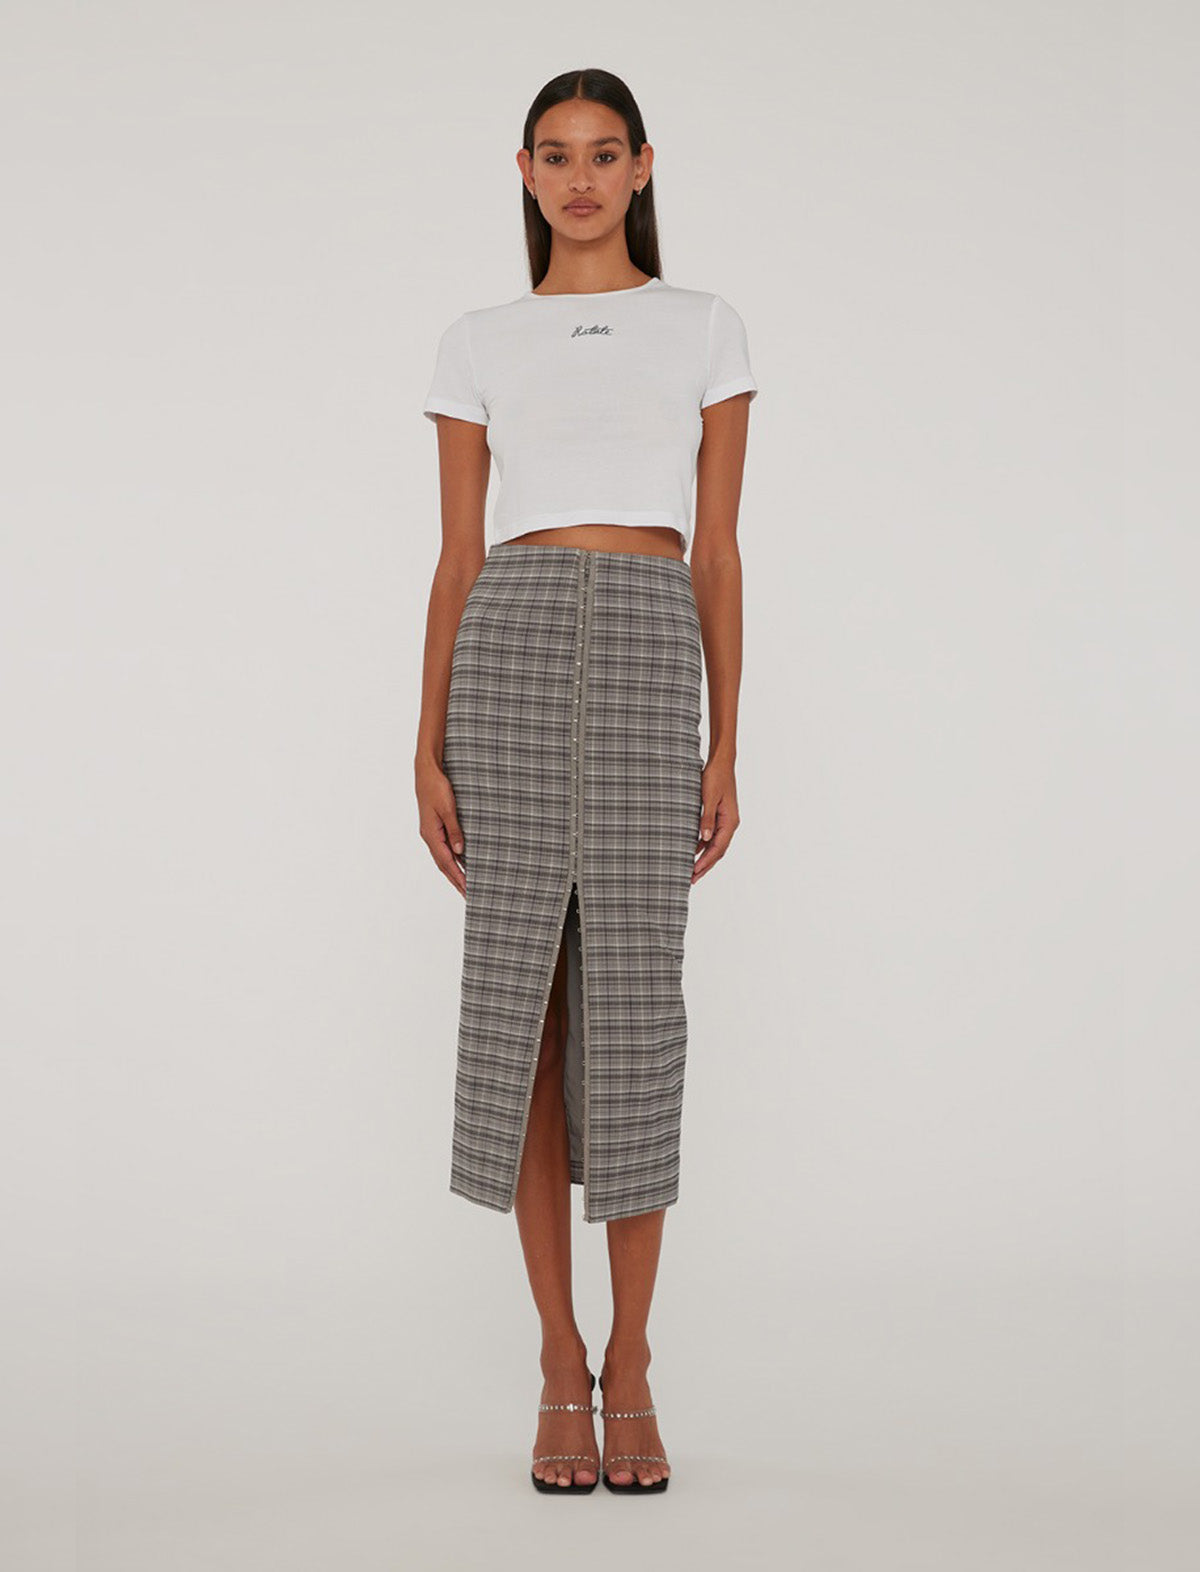 ROTATE Birger Christensen Stretchy Pencil Skirt In Gray Check+Frost Gray Comb